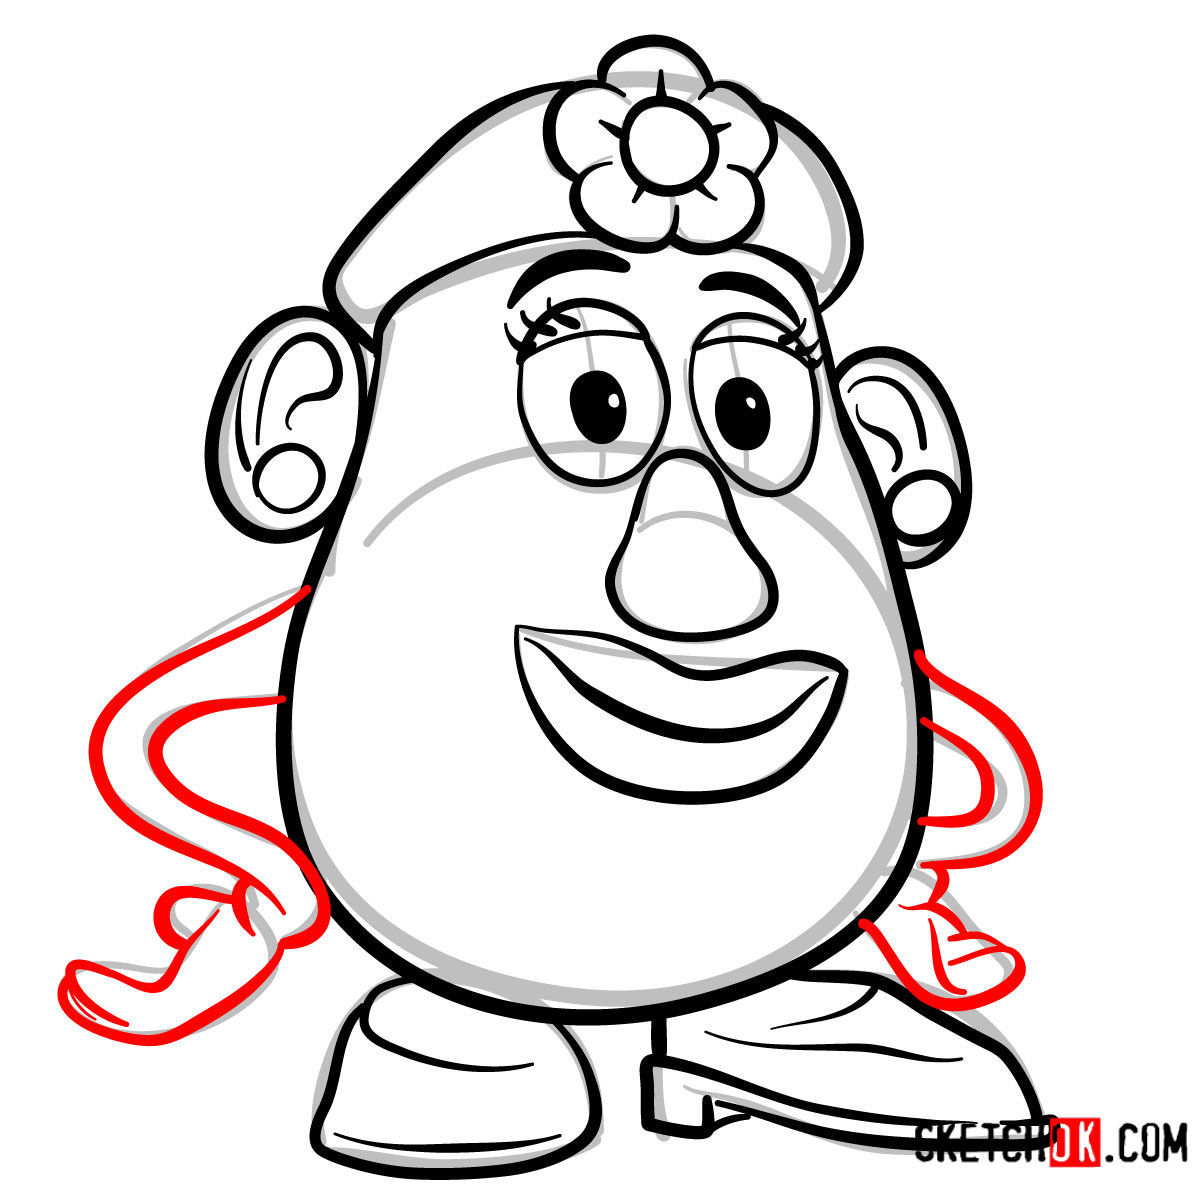 How to draw Mrs. Potato Head from Toy Story - step 08